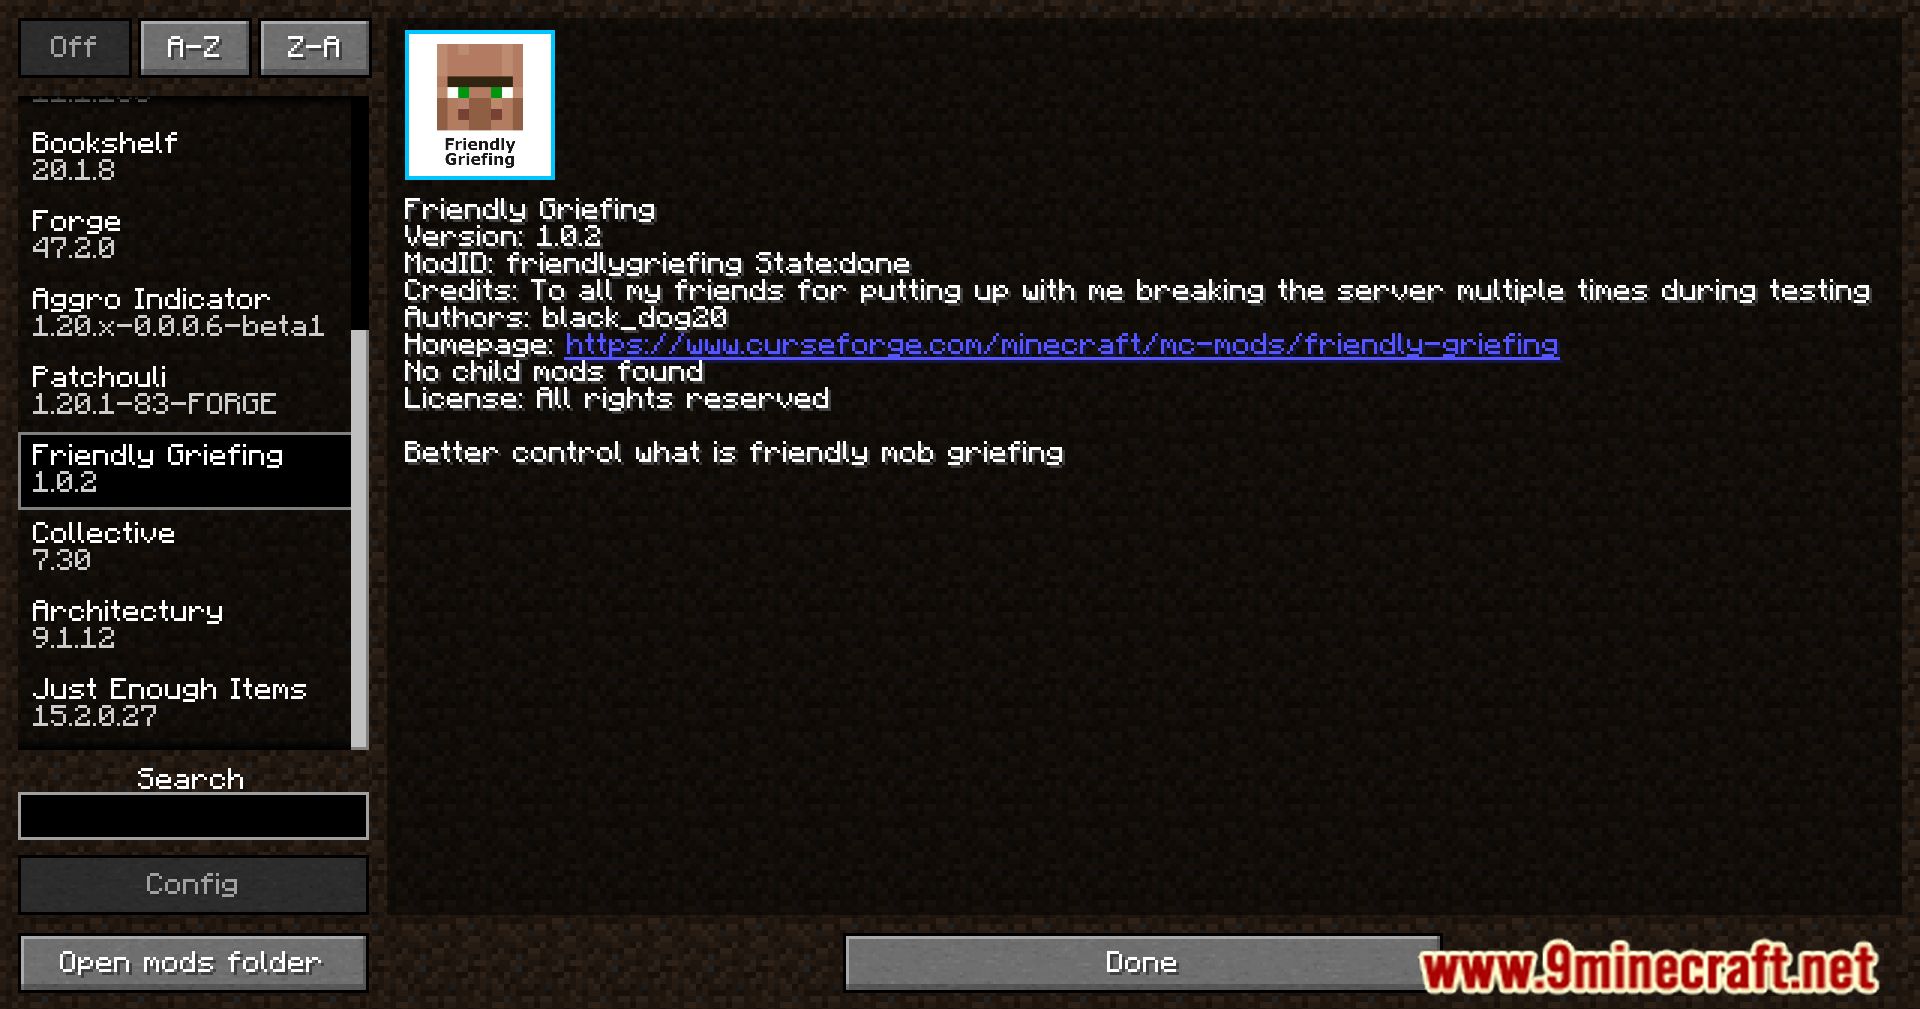 Friendly Griefing Mod (1.20.1, 1.19.4) - Configurable Control Over Griefing In Minecraft. 2